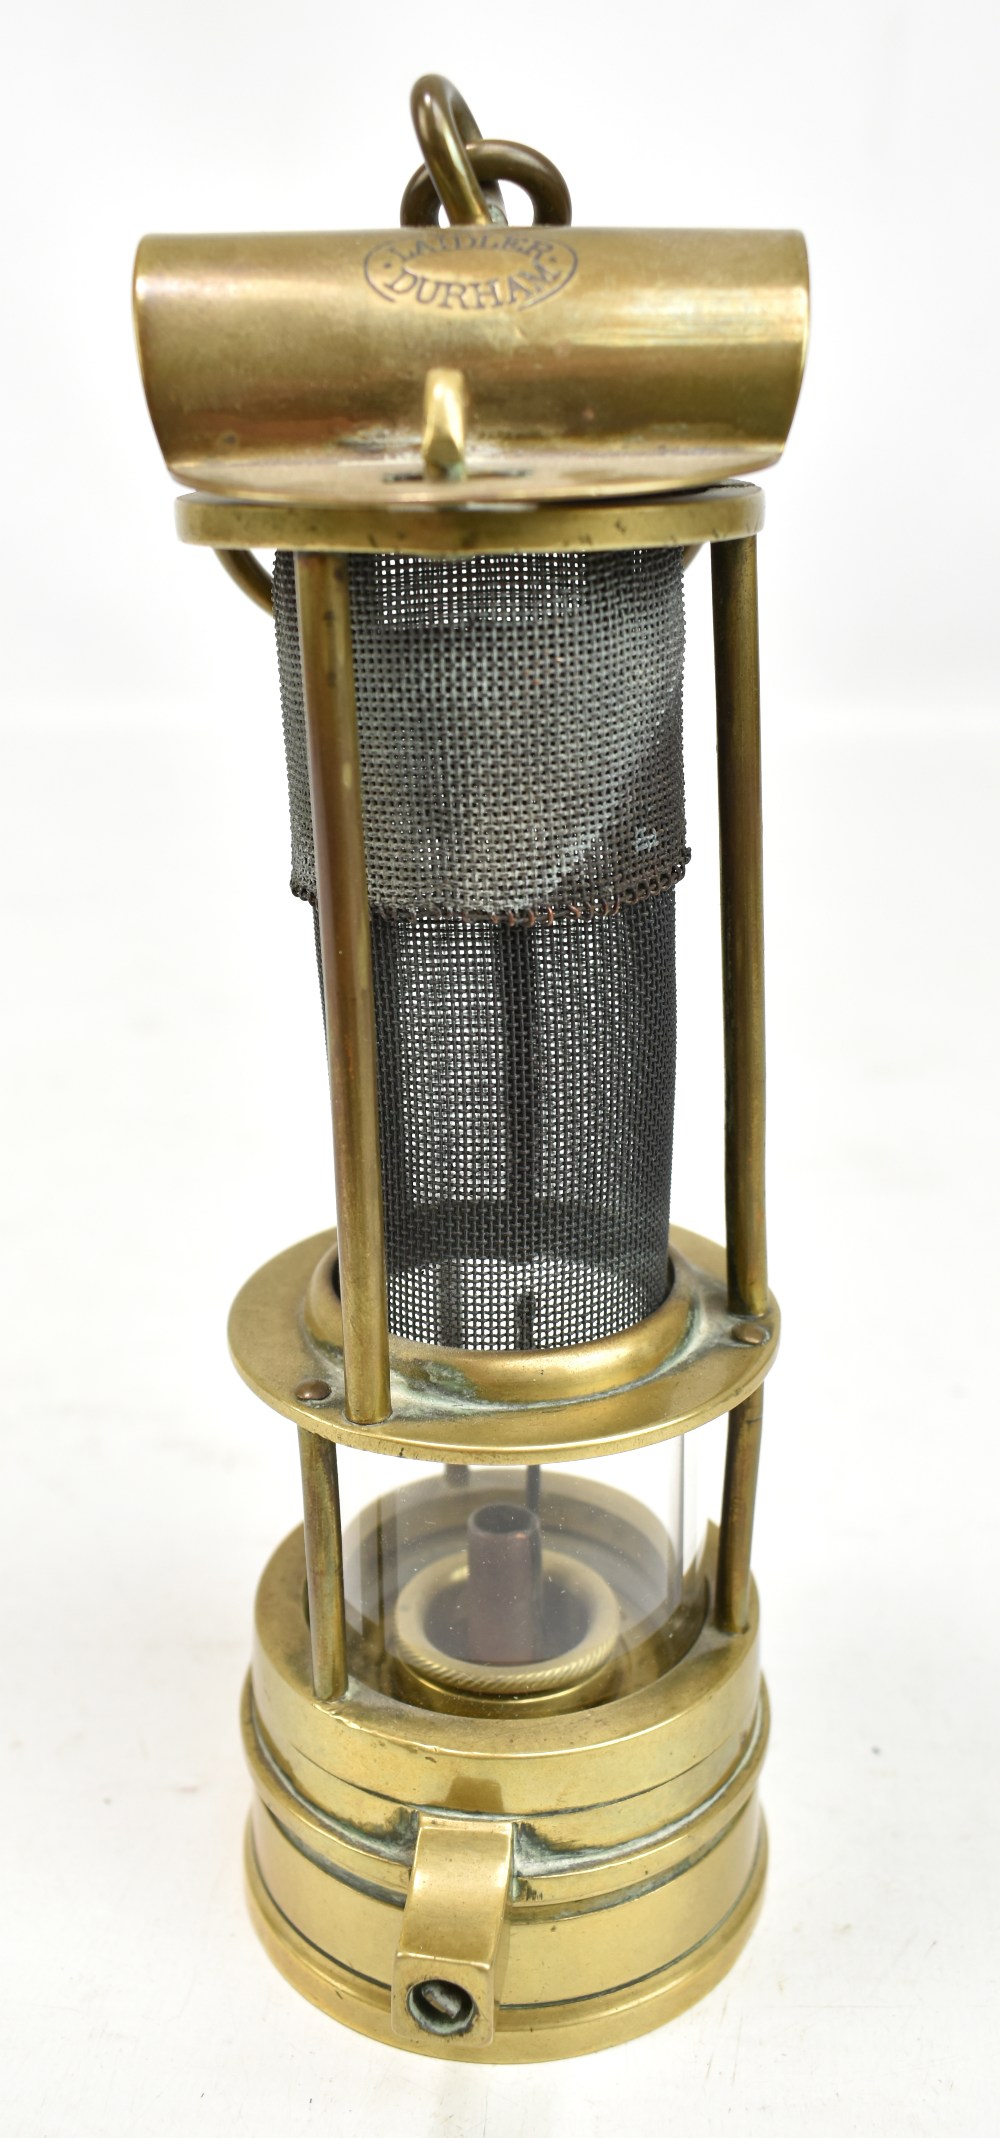 LAIDLER OF DURHAM; an early 20th century three bar Clanny-type frame safety lamp with stamped